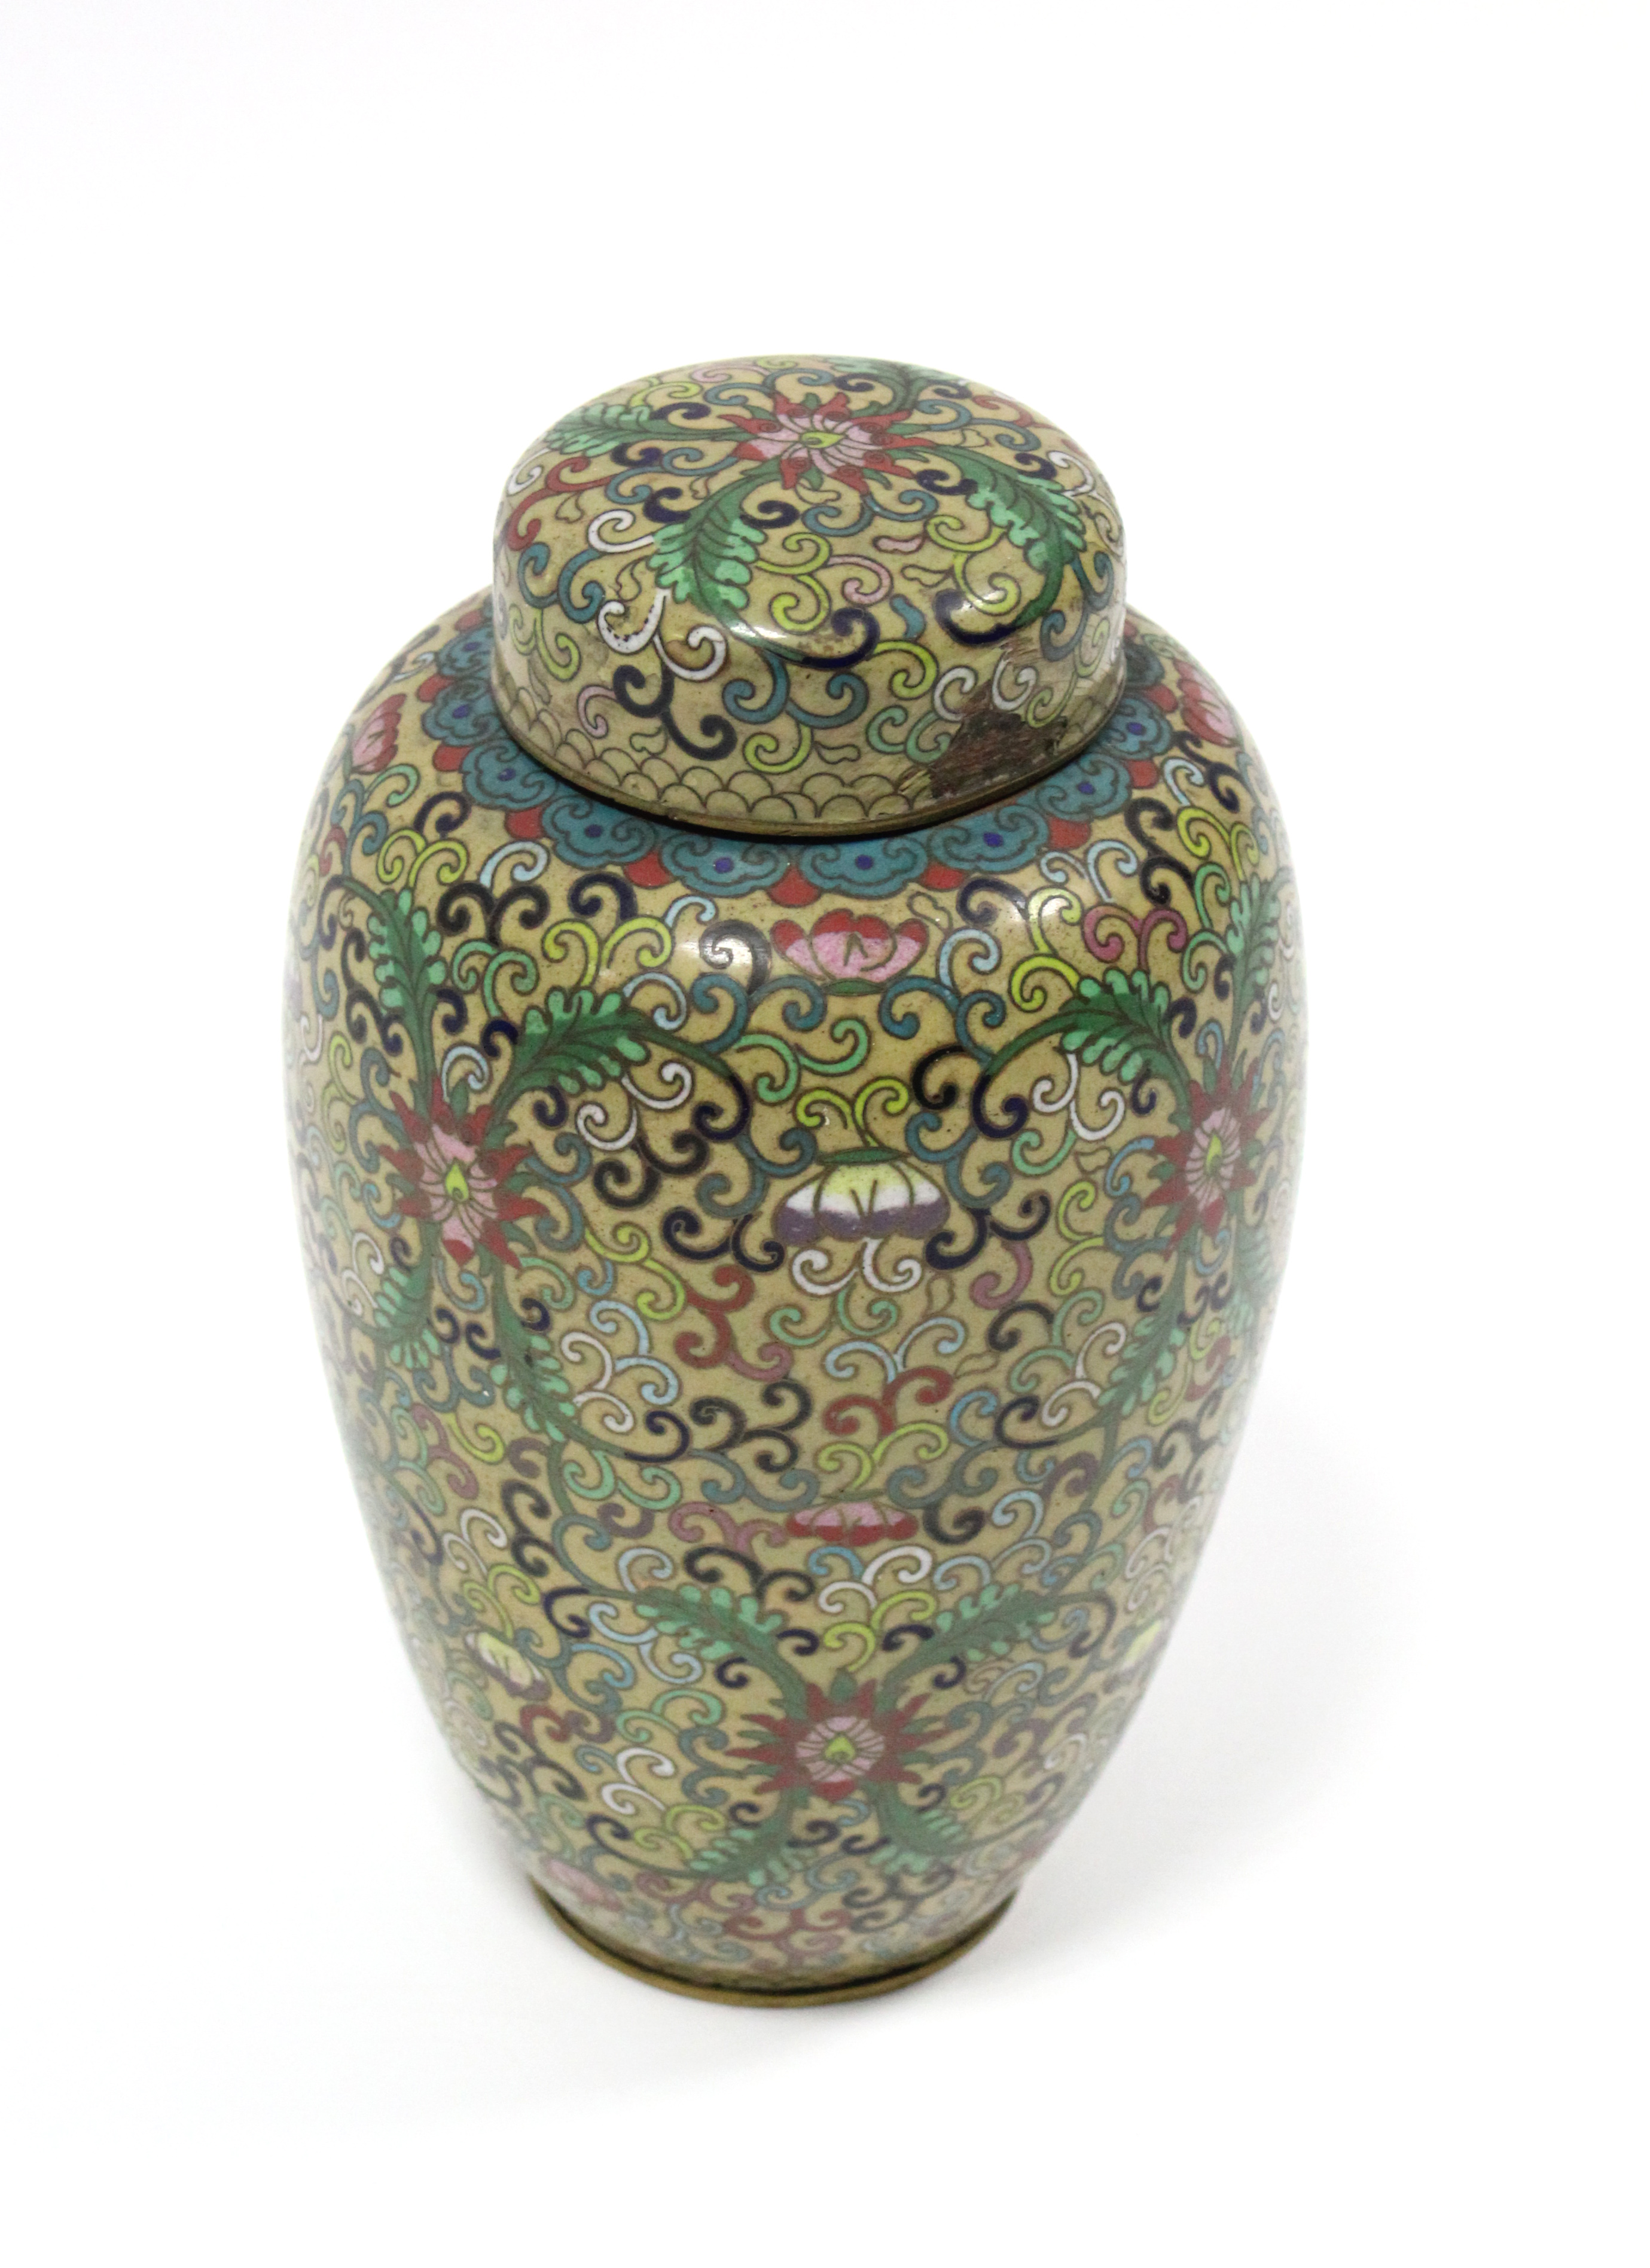 A late 19th/early 20th century Chinese cloisonné ovoid vase with stylised scrolling foliate design - Image 2 of 3